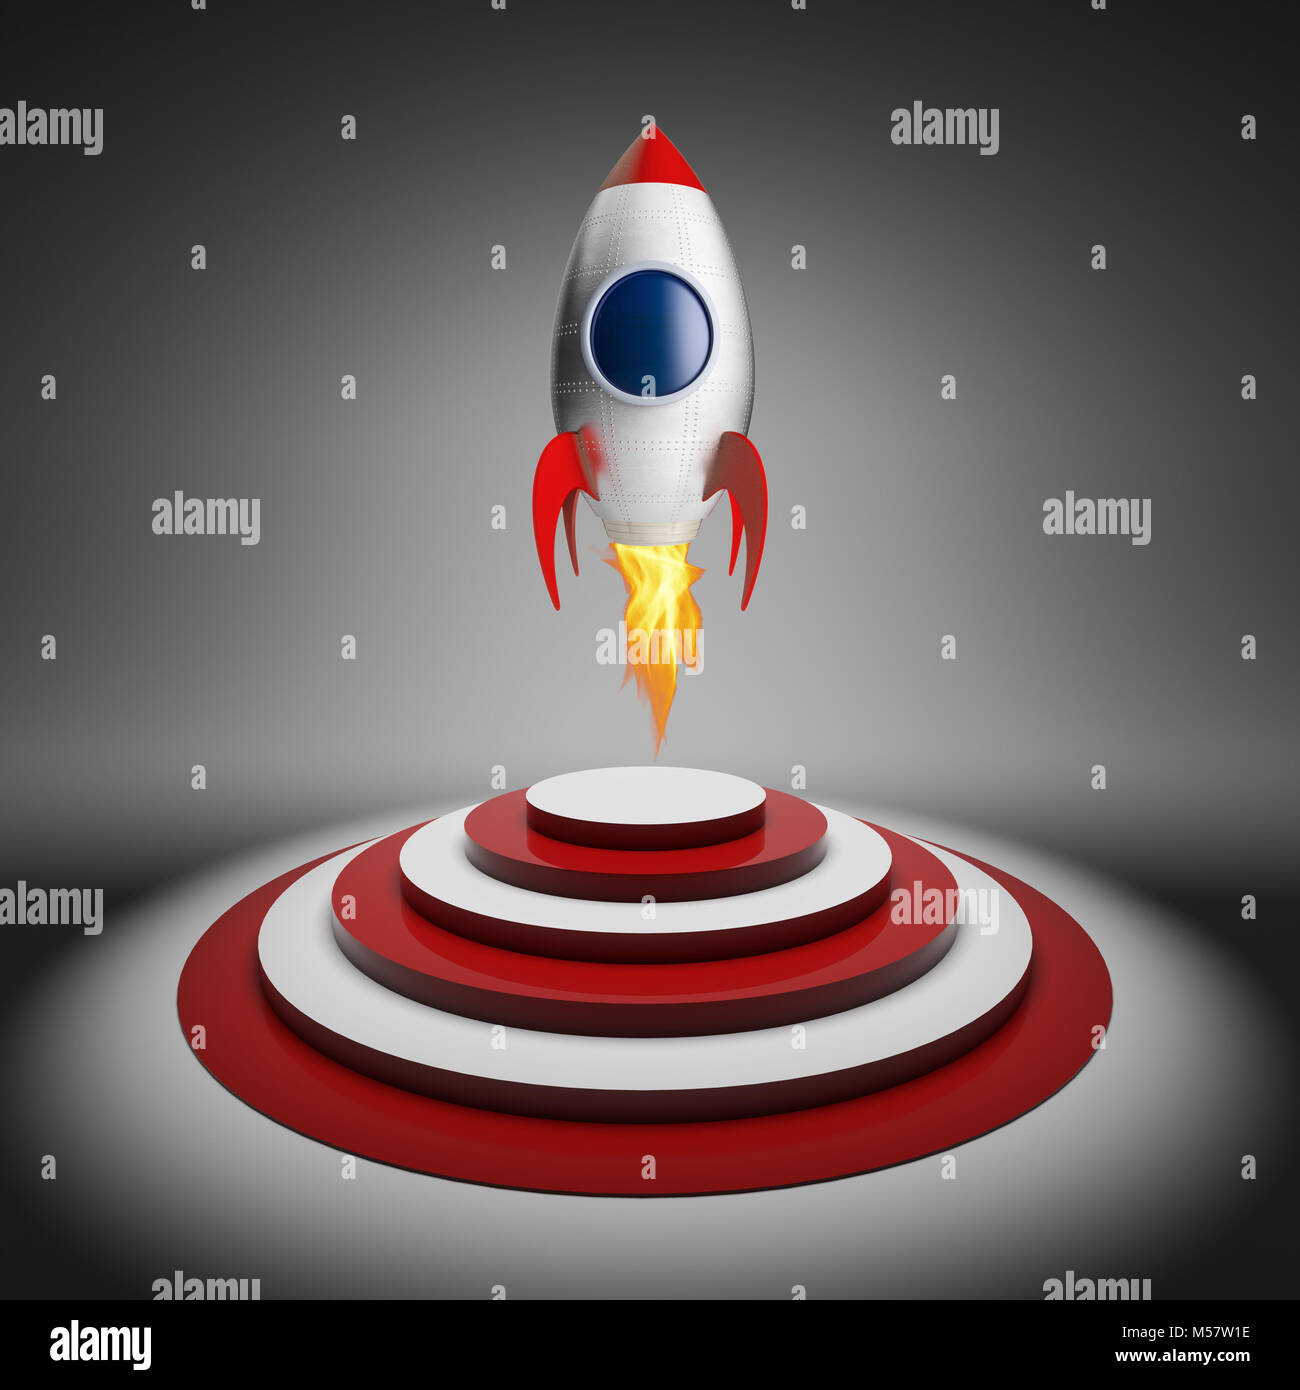 classic rocket toy and target stair 3d rendering image Stock Photo